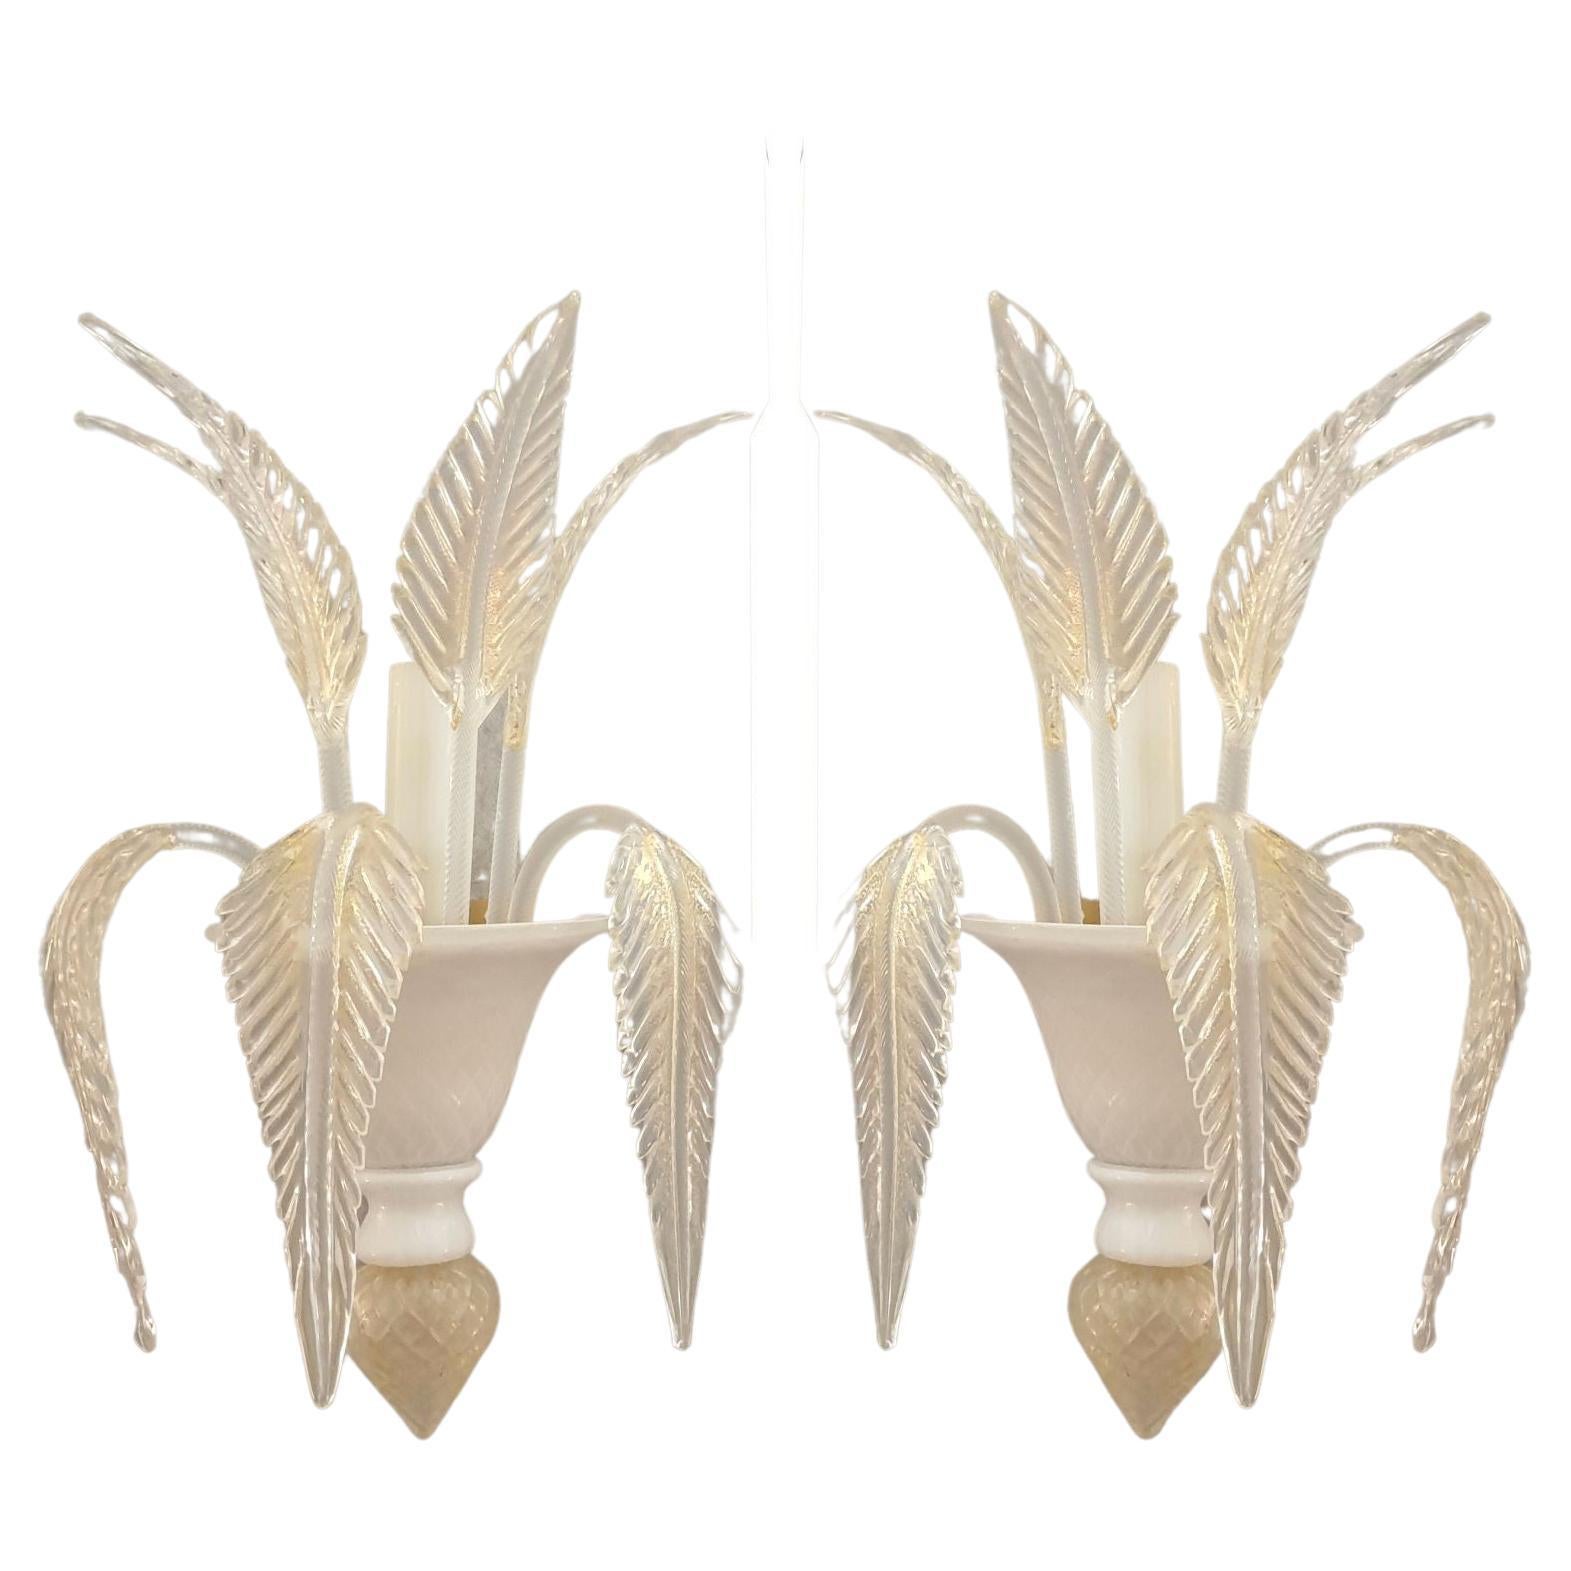 White-gold Murano glass sconces - a pair